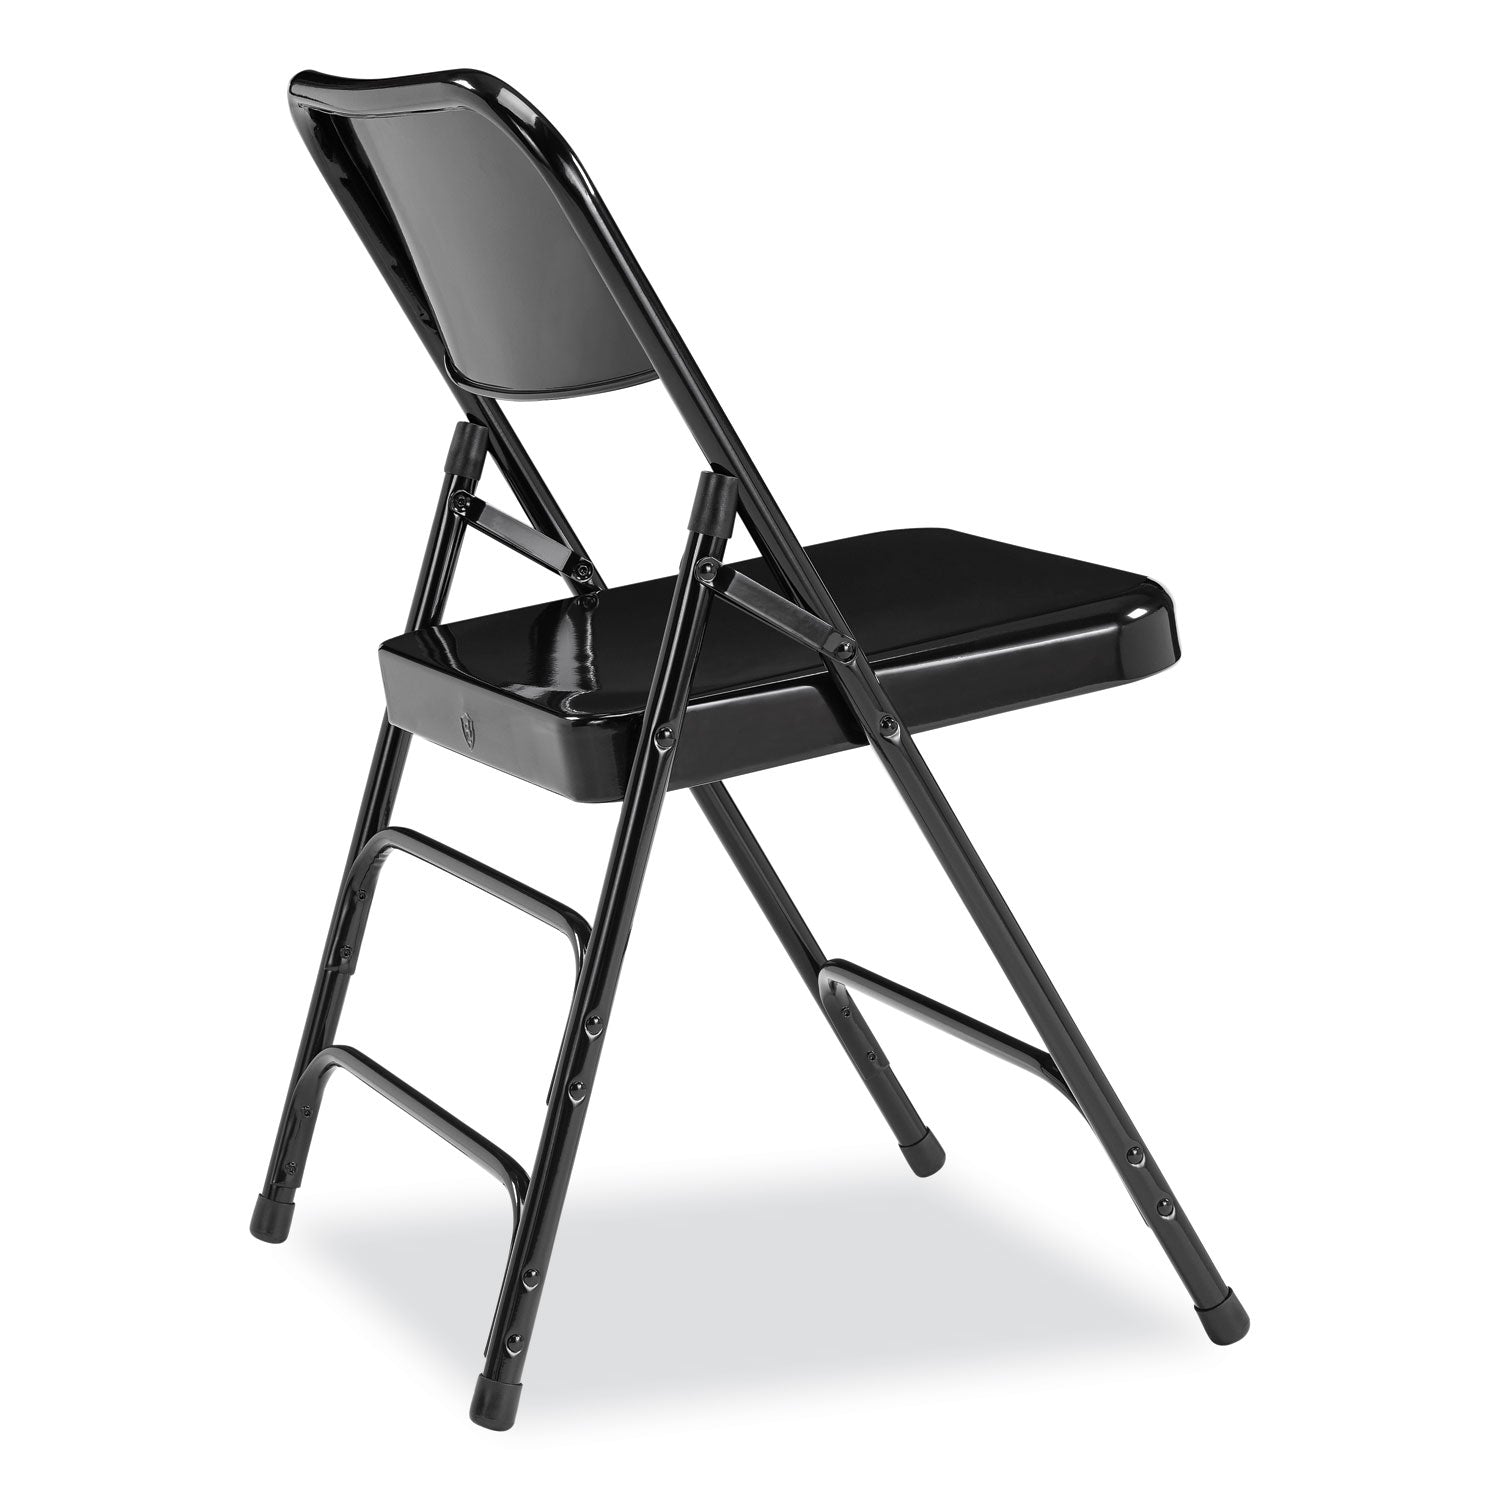 300-series-deluxe-all-steel-triple-brace-folding-chair-supports-480-lb-1725-seat-ht-black-4-ct-ships-in-1-3-bus-days_nps310 - 4